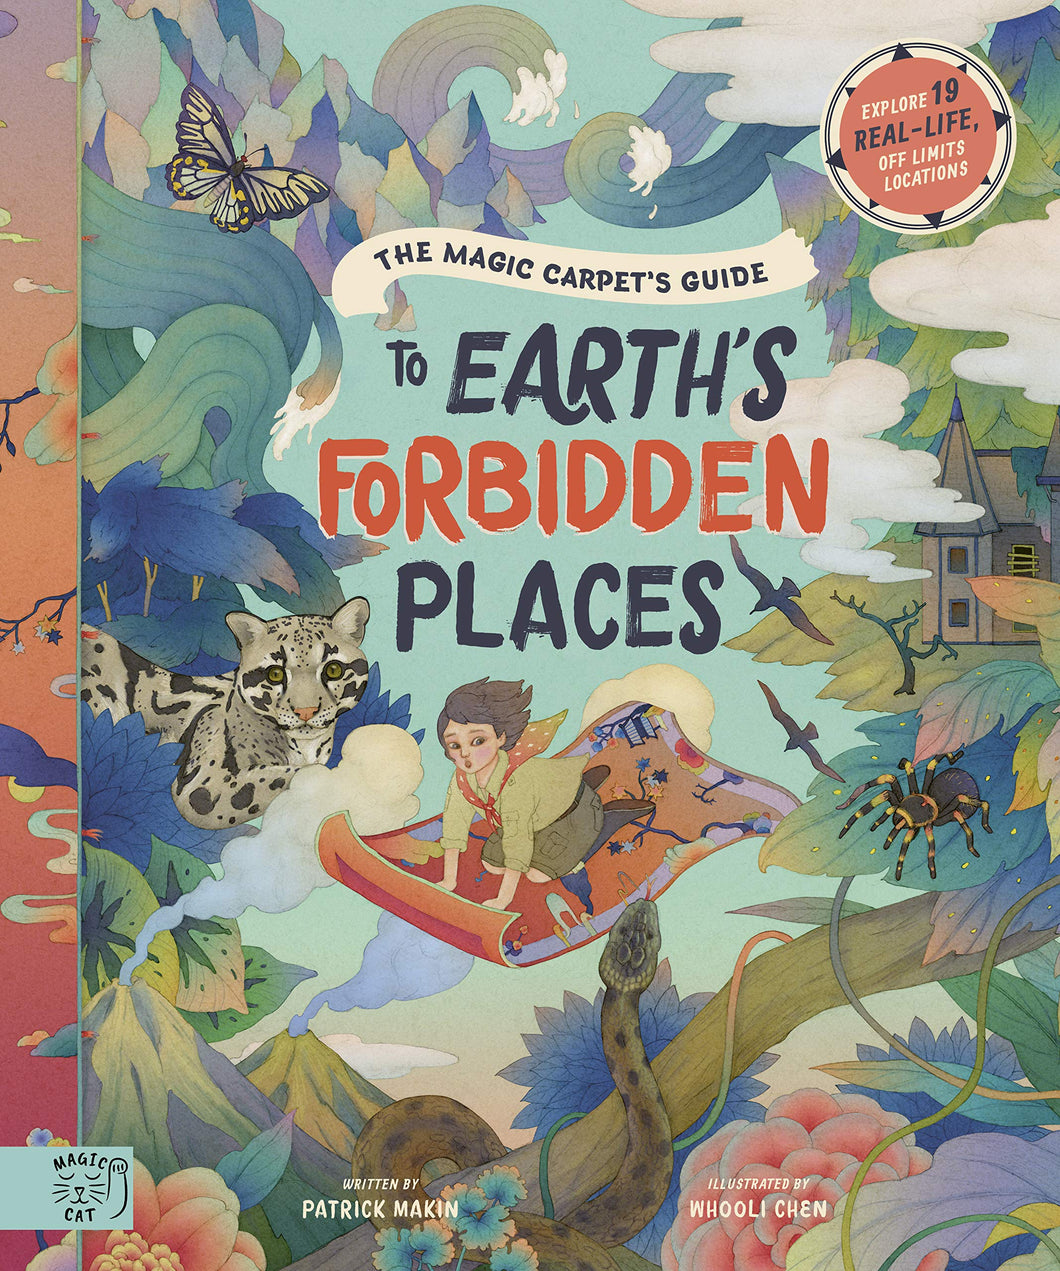 The Magic Carpet's Guide to Earth's Forbidden Places: See the world's best-kept secrets